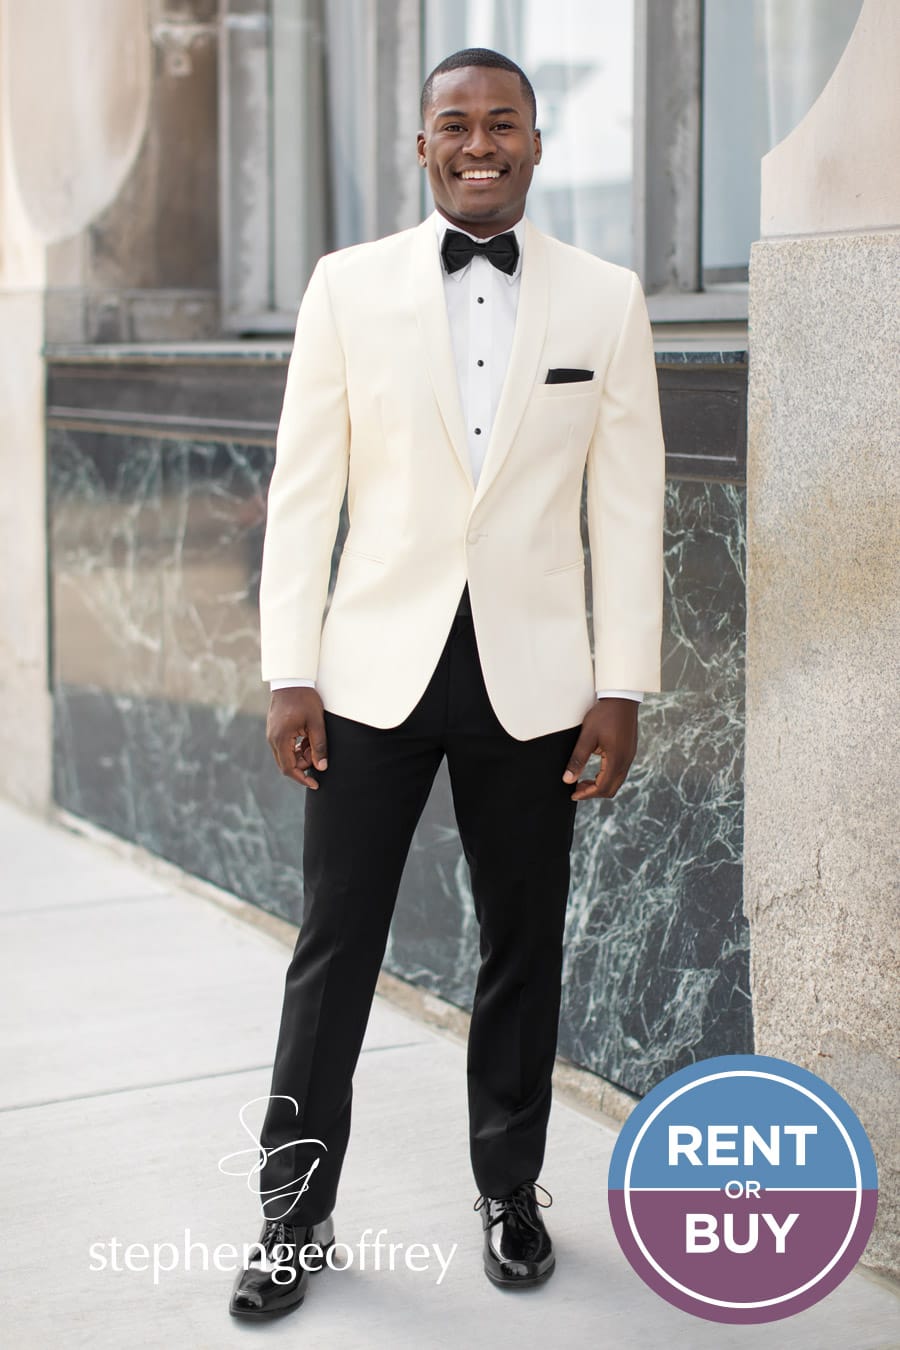 Ivory Classic Shawl Tuxedo Rent or Buy for your wedding